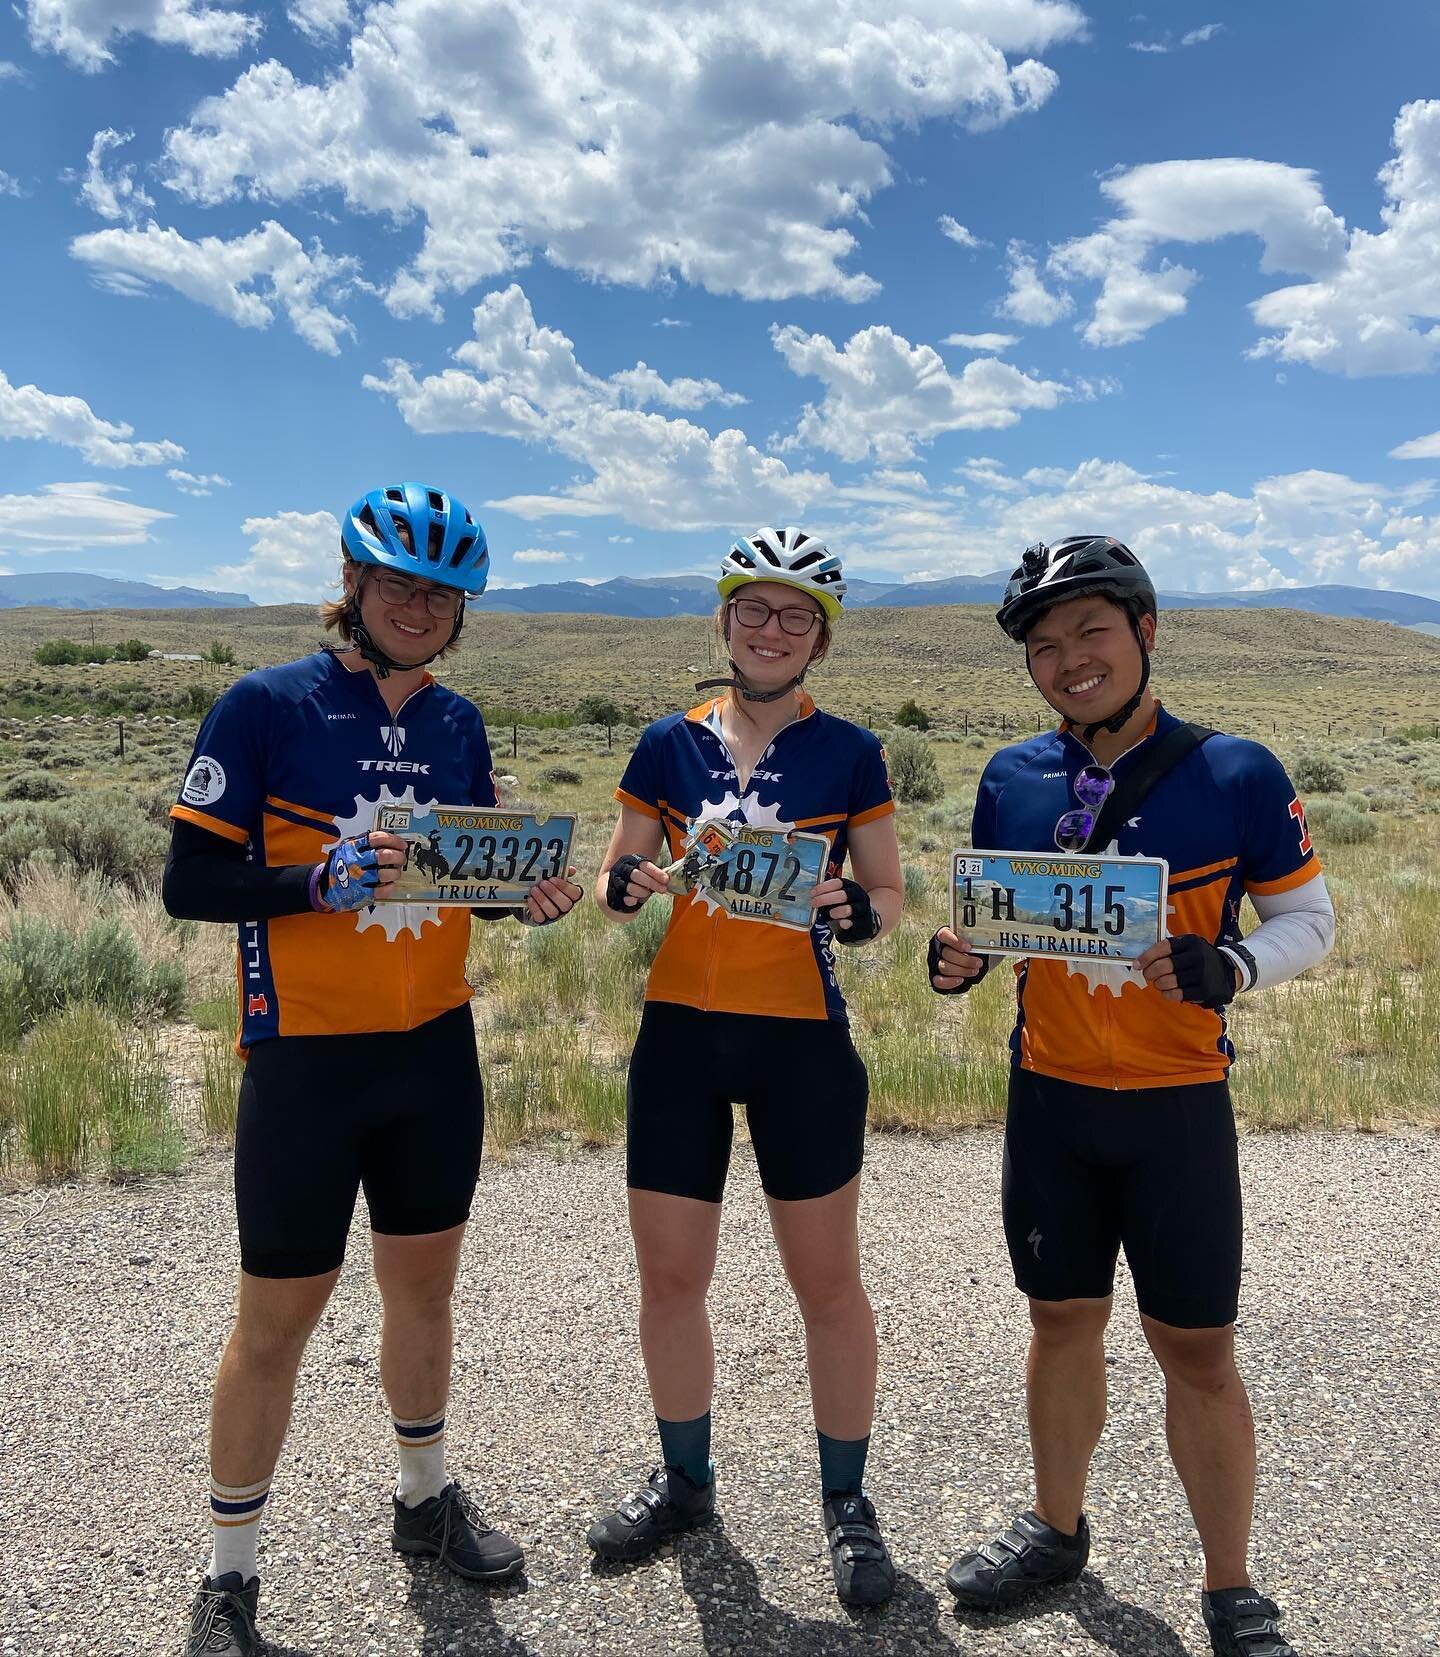 Day 47: Today was a tough ride. With the heat beating down on us we biked from Riverton to Dubois, WY hitting 76.3 miles! Along the way we found 3 out of 8 Wyoming plates as a whole group! We&rsquo;re slowly catching up to @mike.rotter and his licens